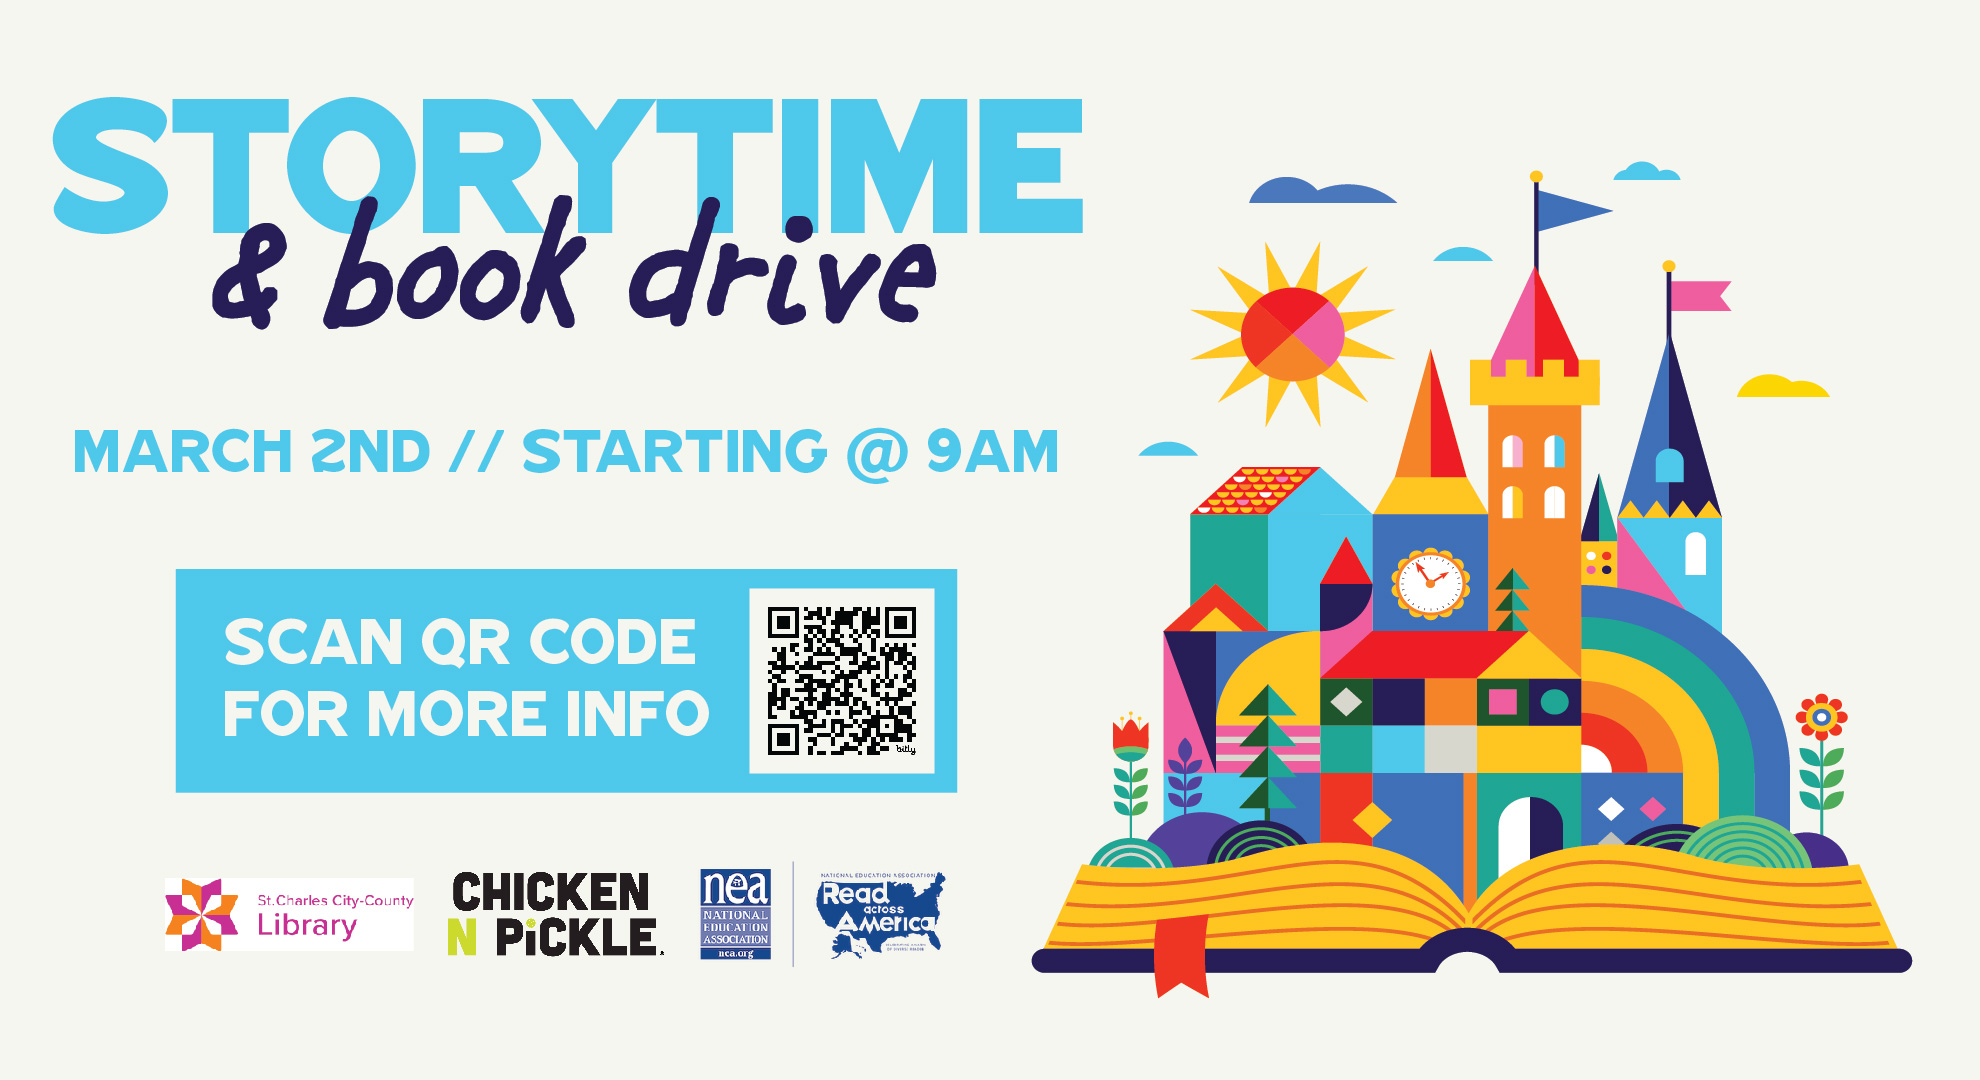 storytime and book drive at Chicken N Pickle